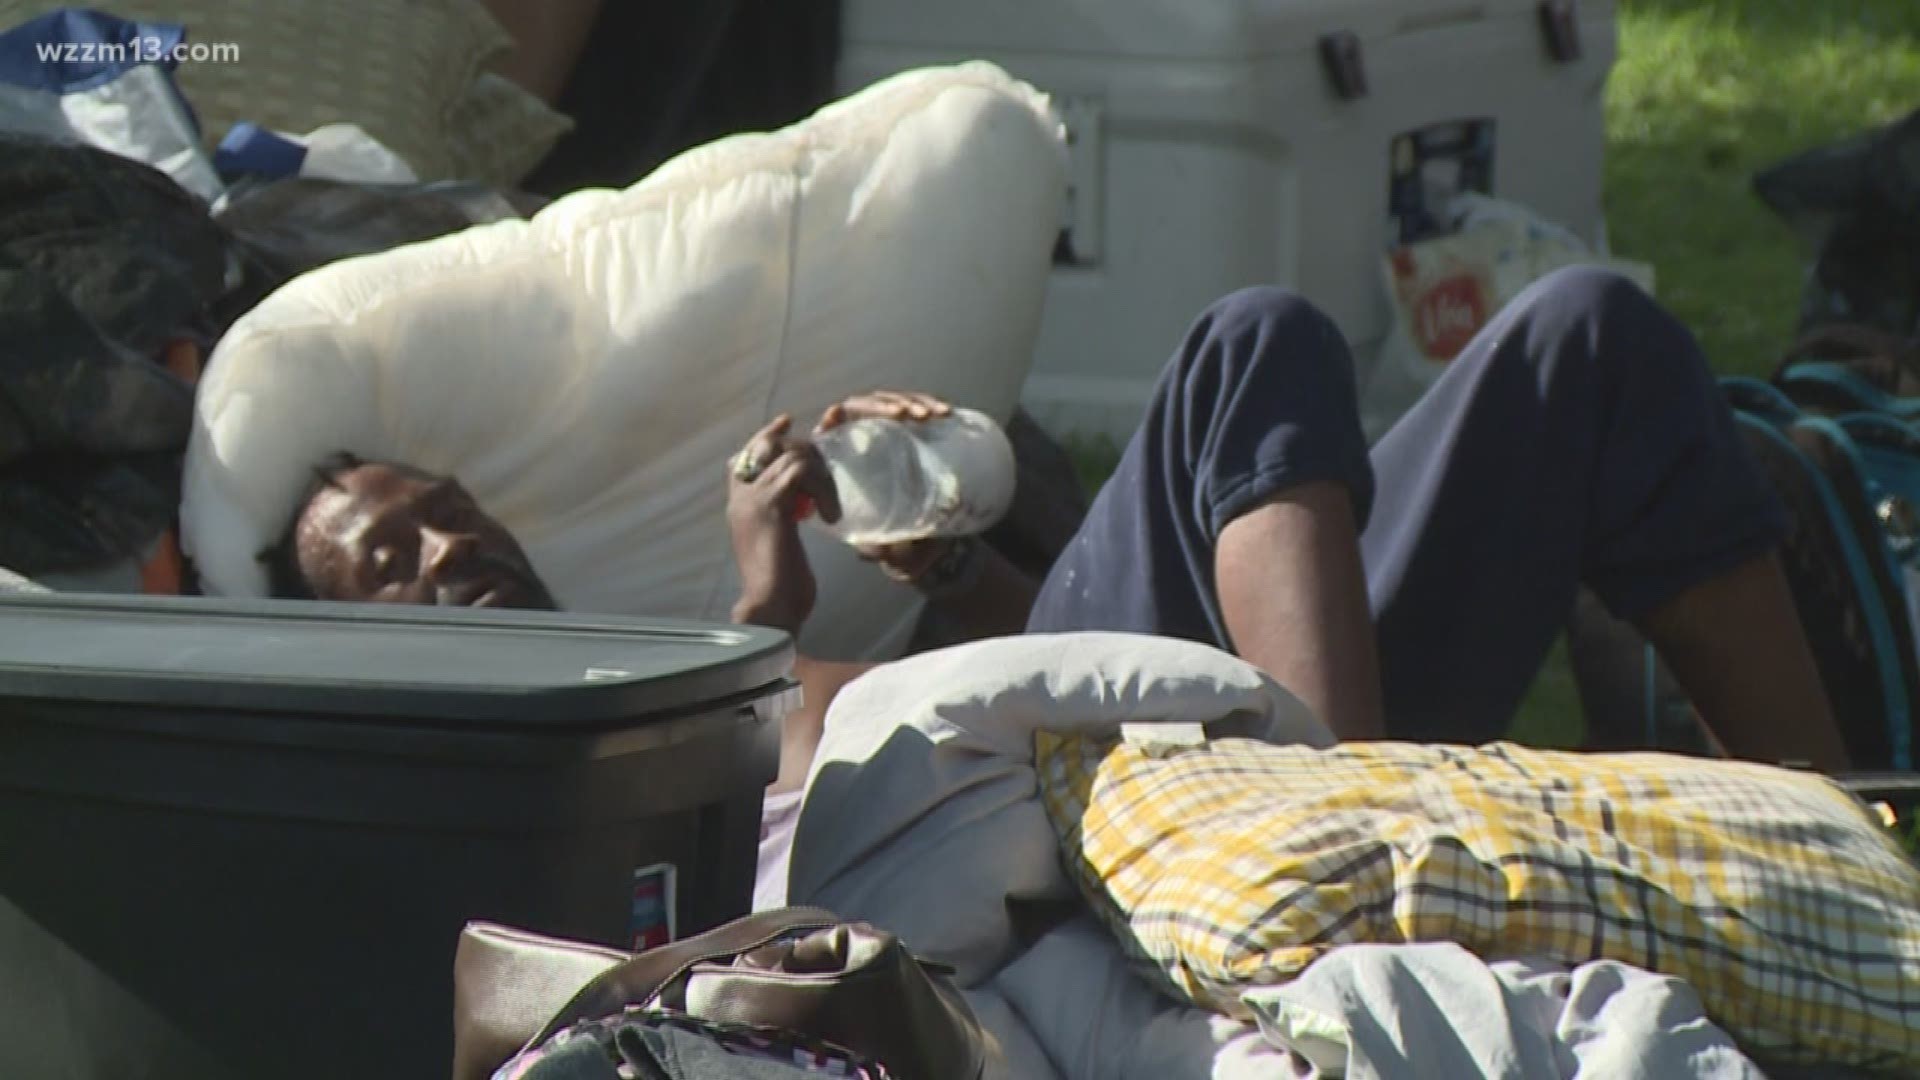 No solution yet in Kalamazoo homeless protest